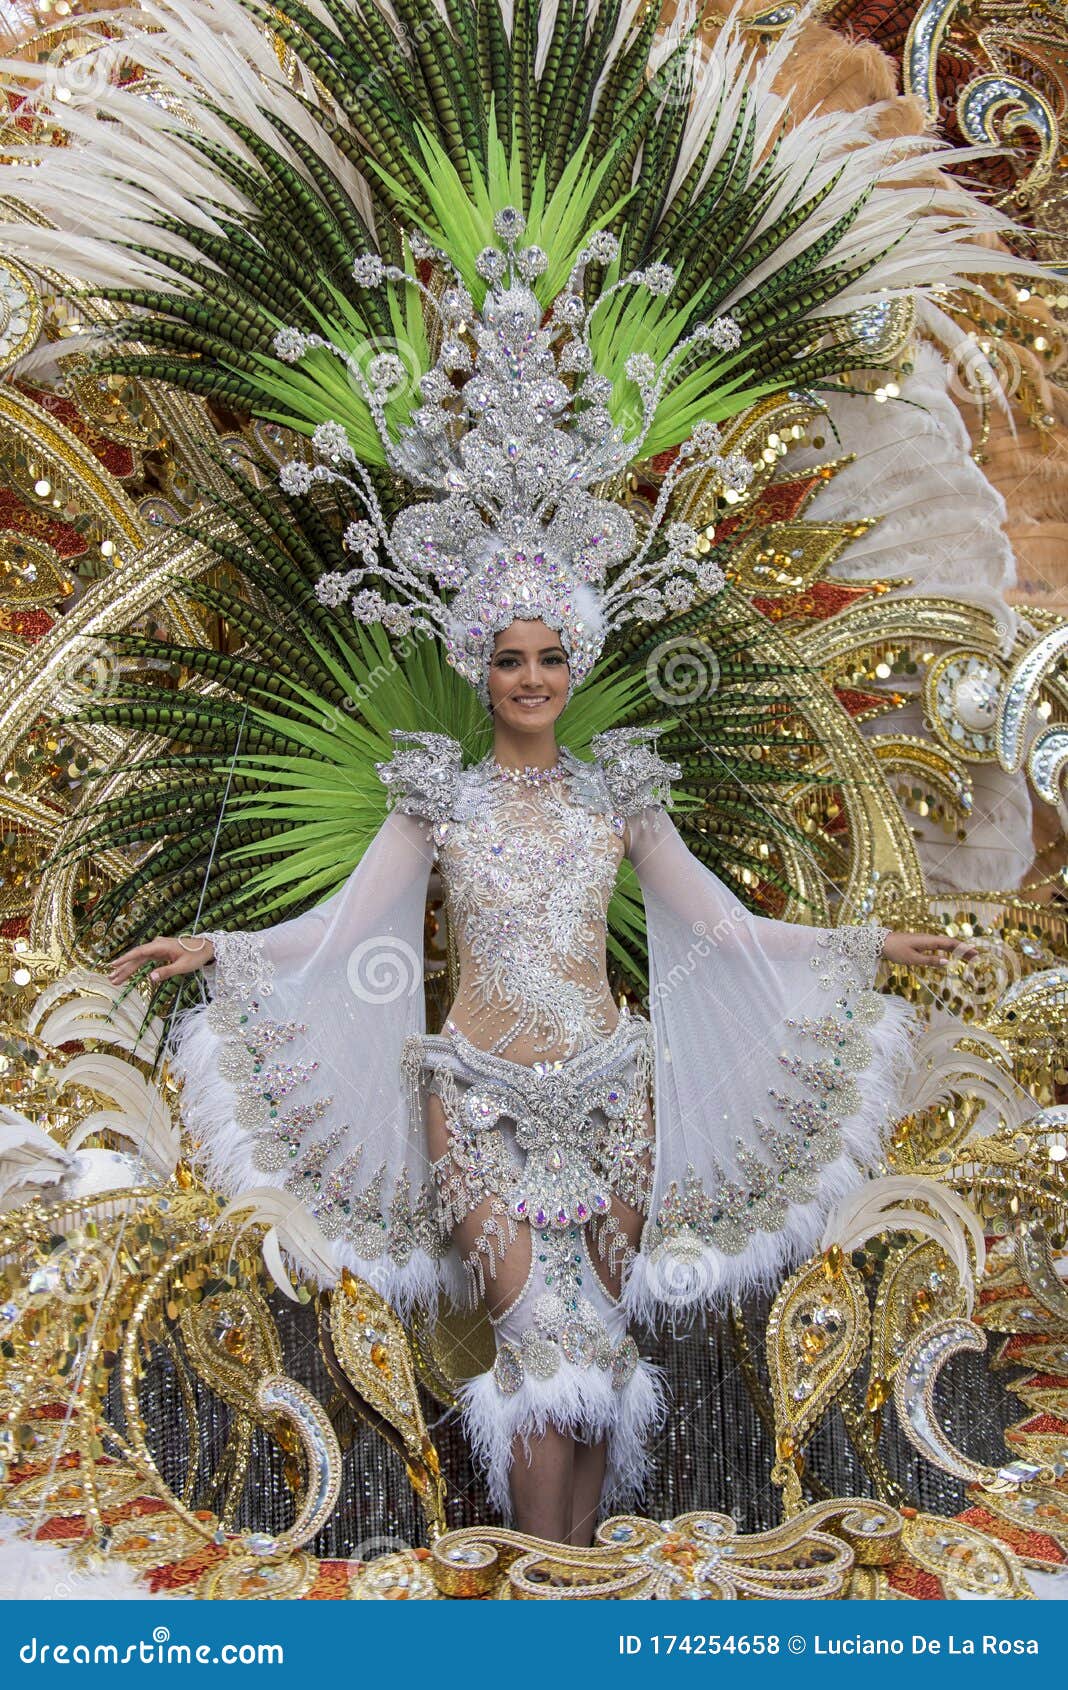 comfortabel aan de andere kant, voordat TENERIFE, FEBRUARY 22: Great Parade on the Street Announcing that Carnival  is Coming. February 22, 2020, Tenerife Canary Islands Editorial Stock Photo  - Image of festival, fashion: 174254658